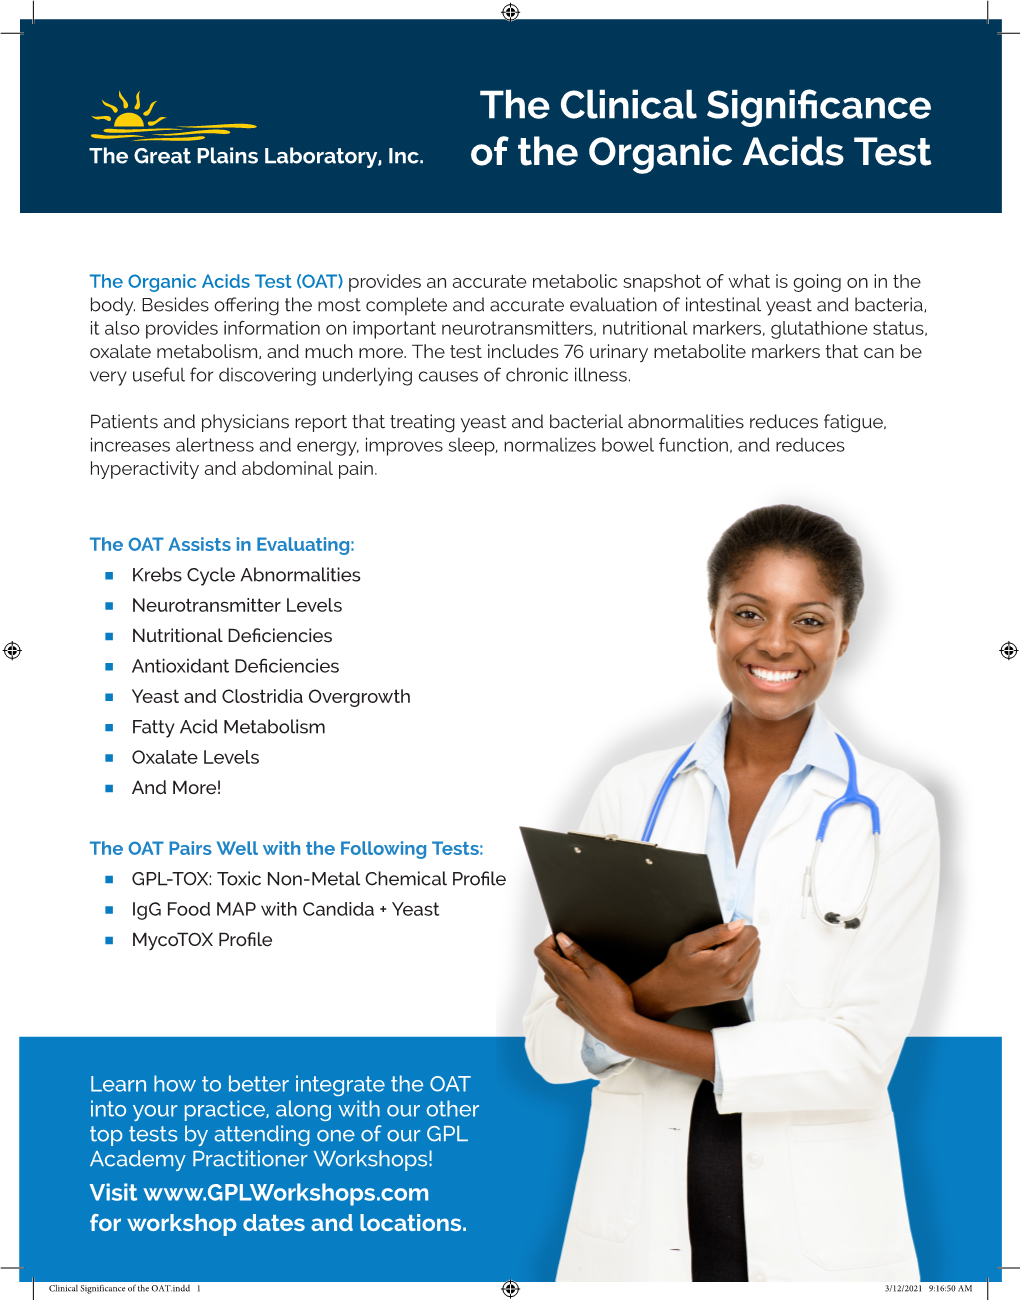 Clinical Significance of the Organic Acids Test